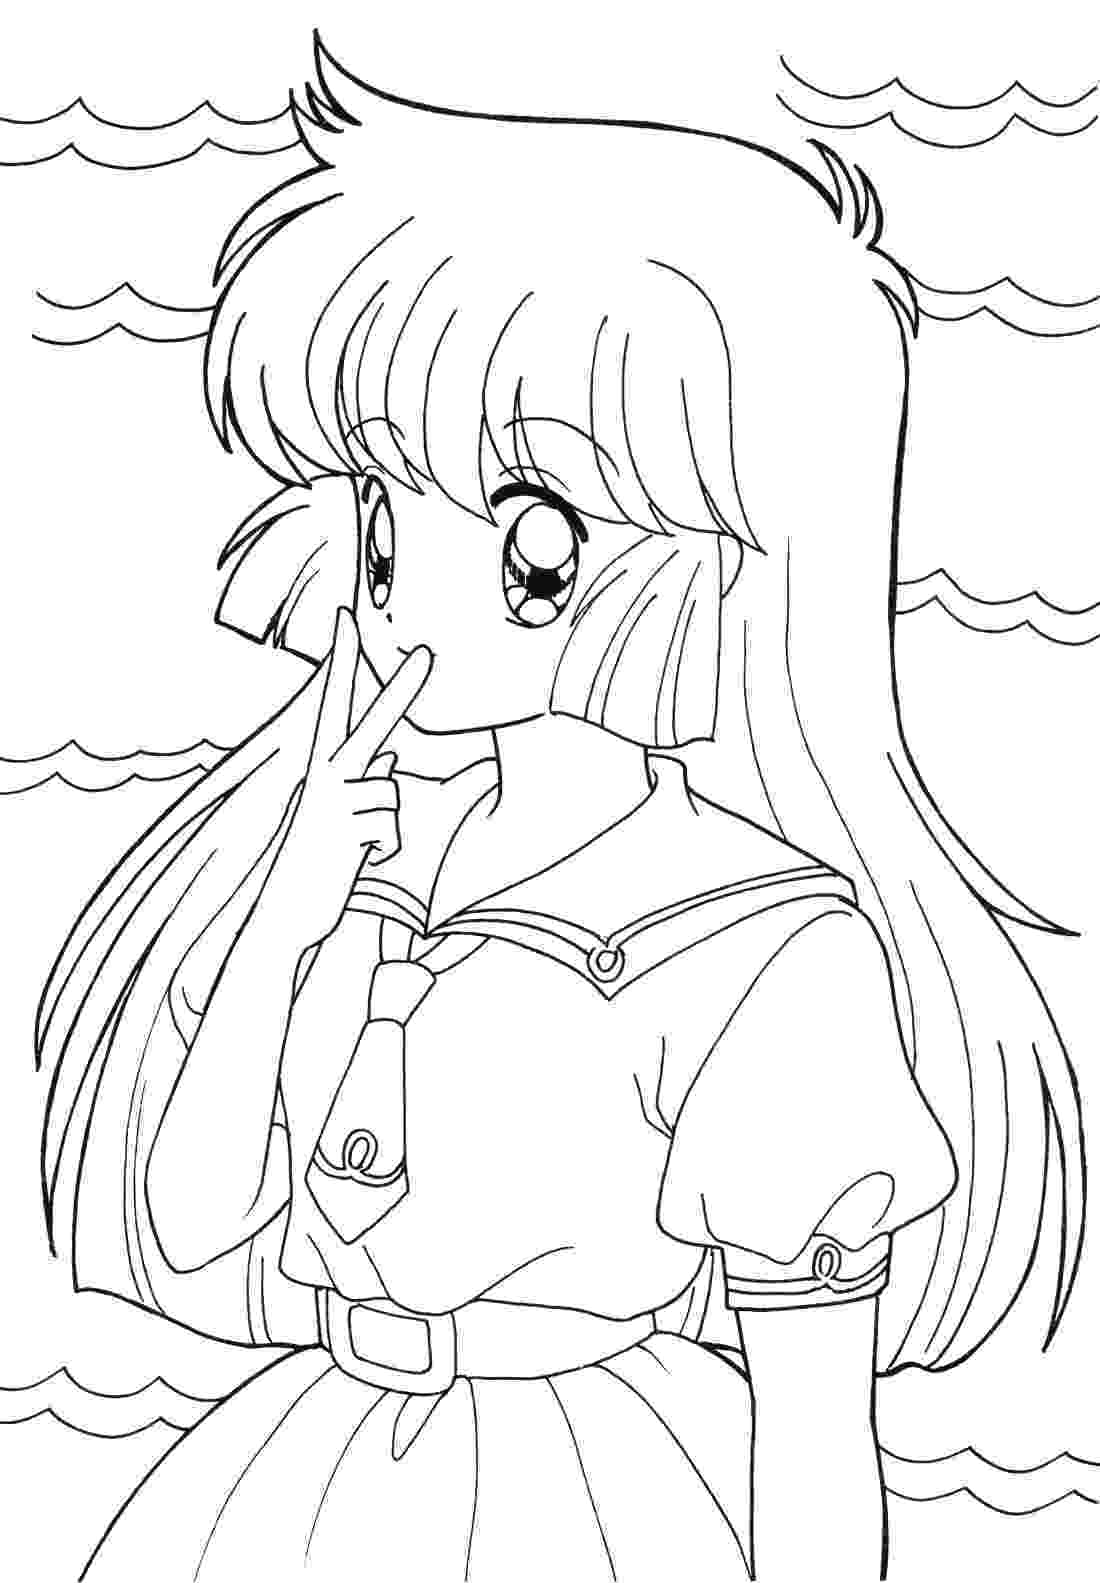 manga girl coloring pages anime coloring pages best coloring pages for kids manga coloring pages girl 